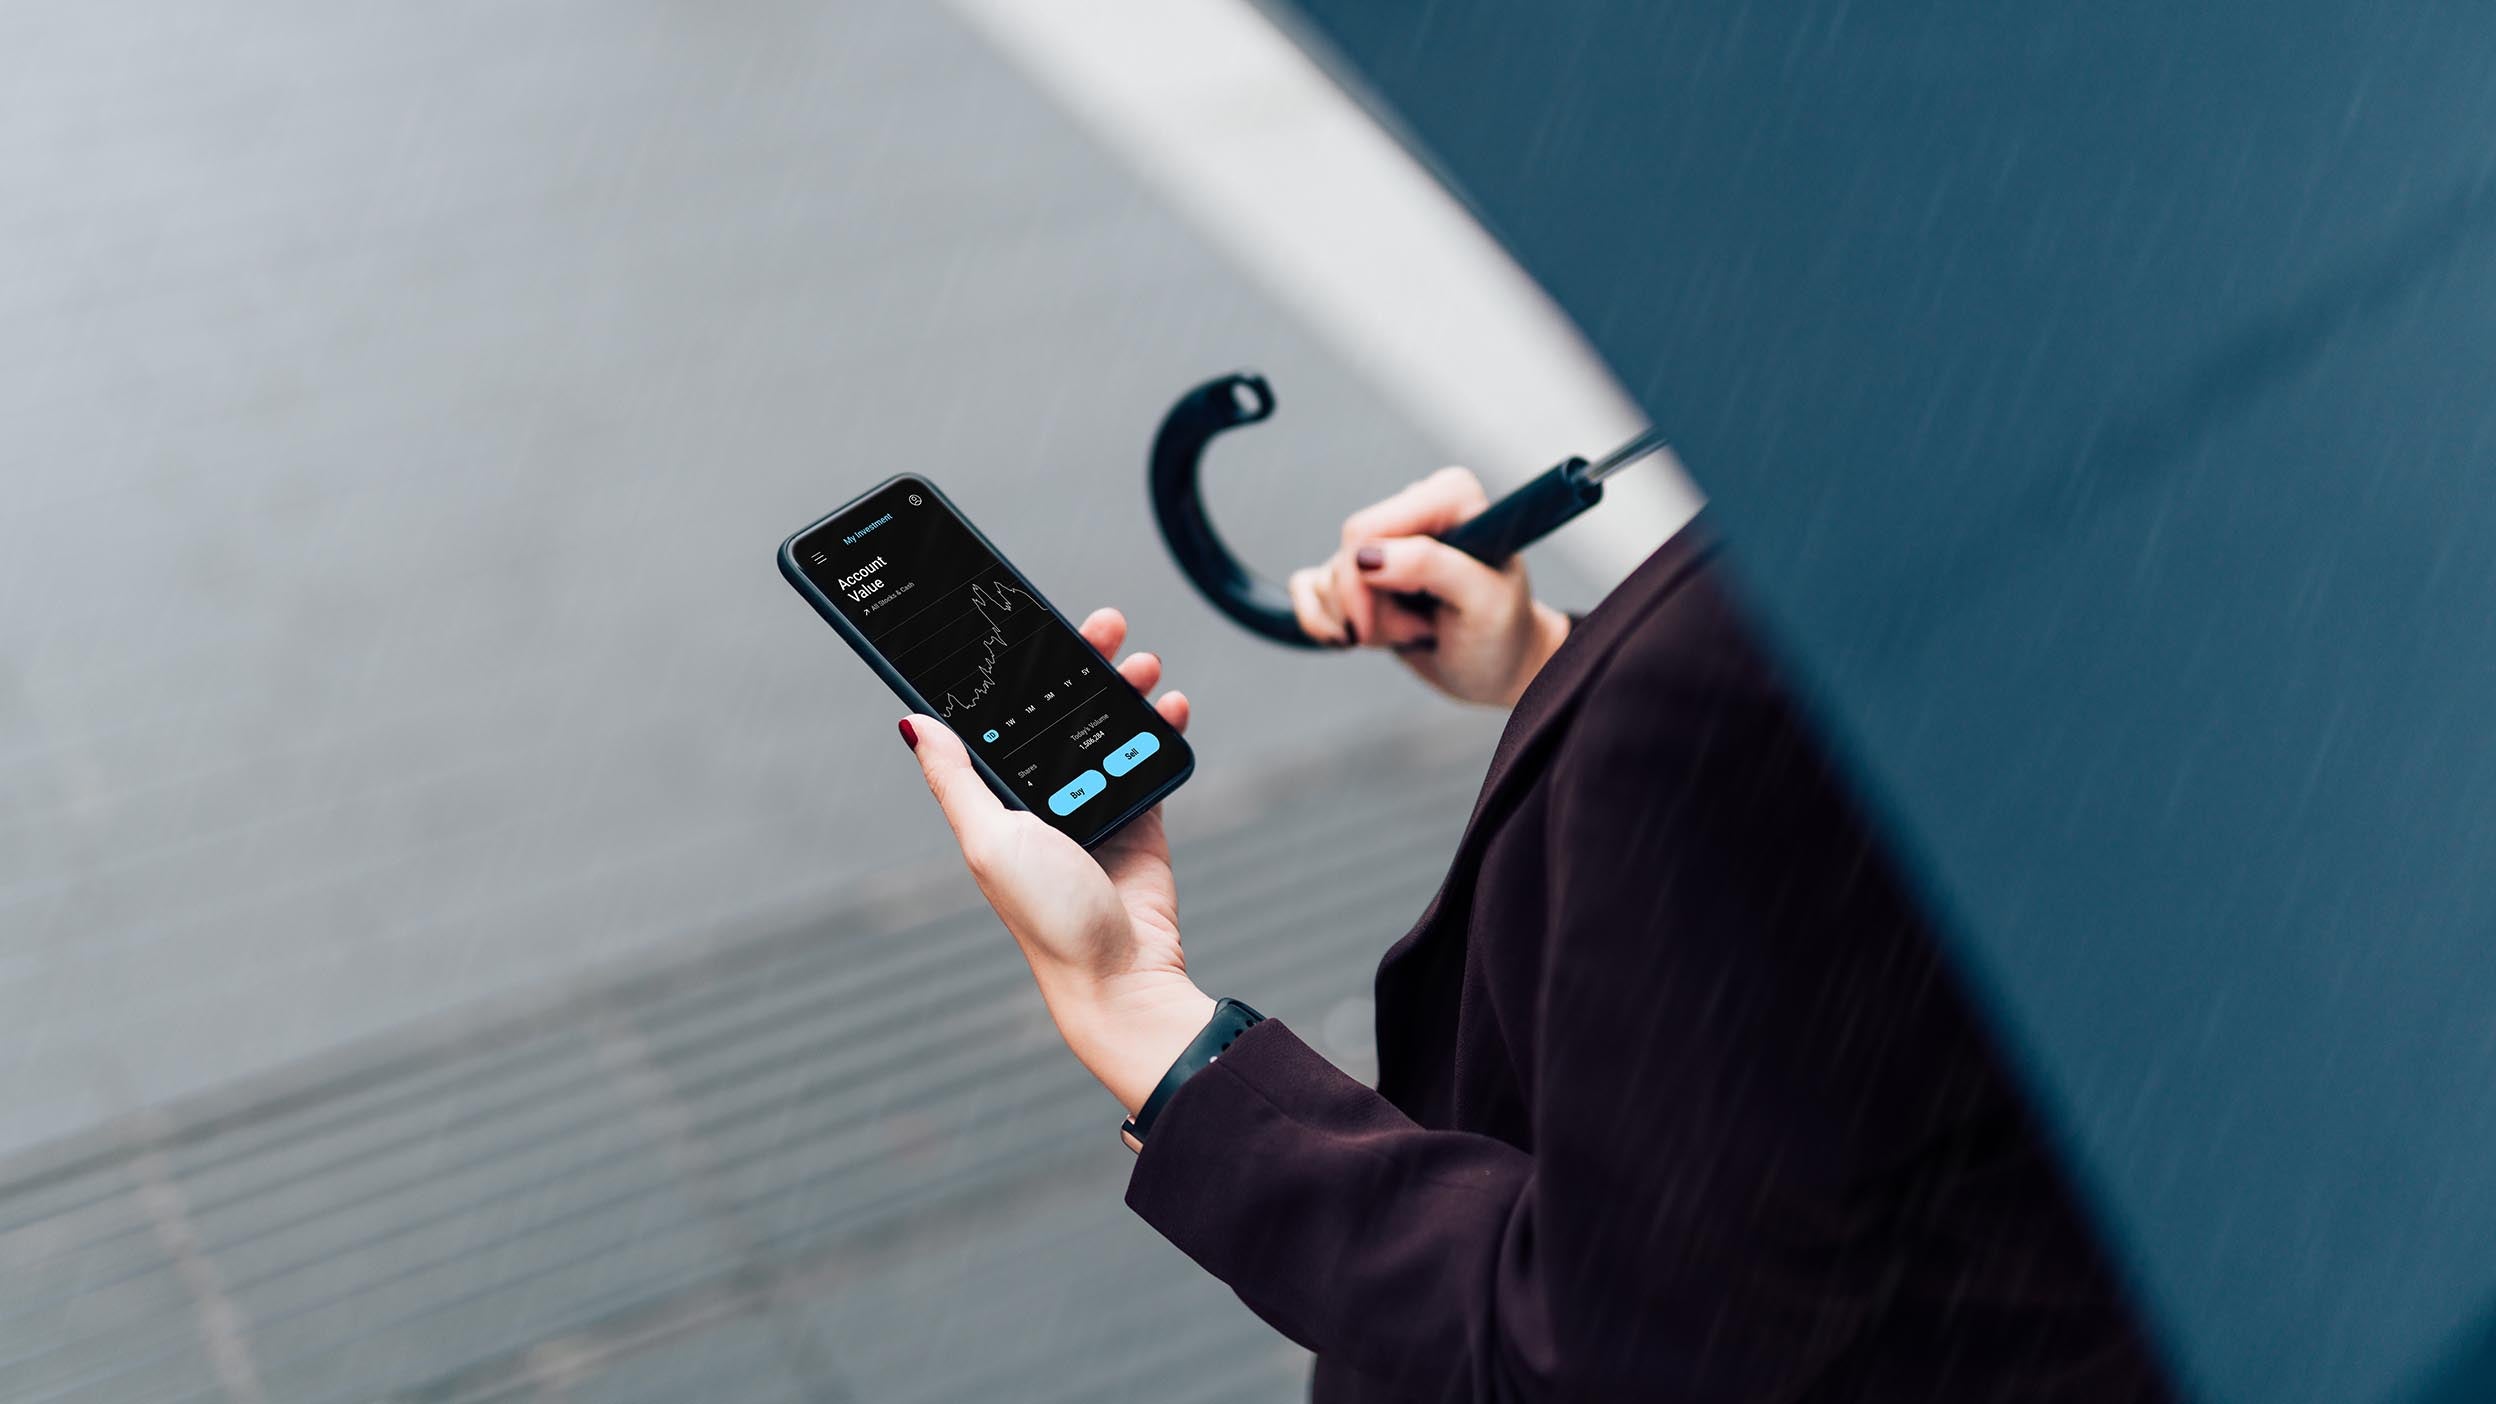 High angle view of a businesswoman using mobile app checking financial data on smartphone, holding an umbrella, walking on the city street in the rain. Insurance protection concept. Business on the go concept.